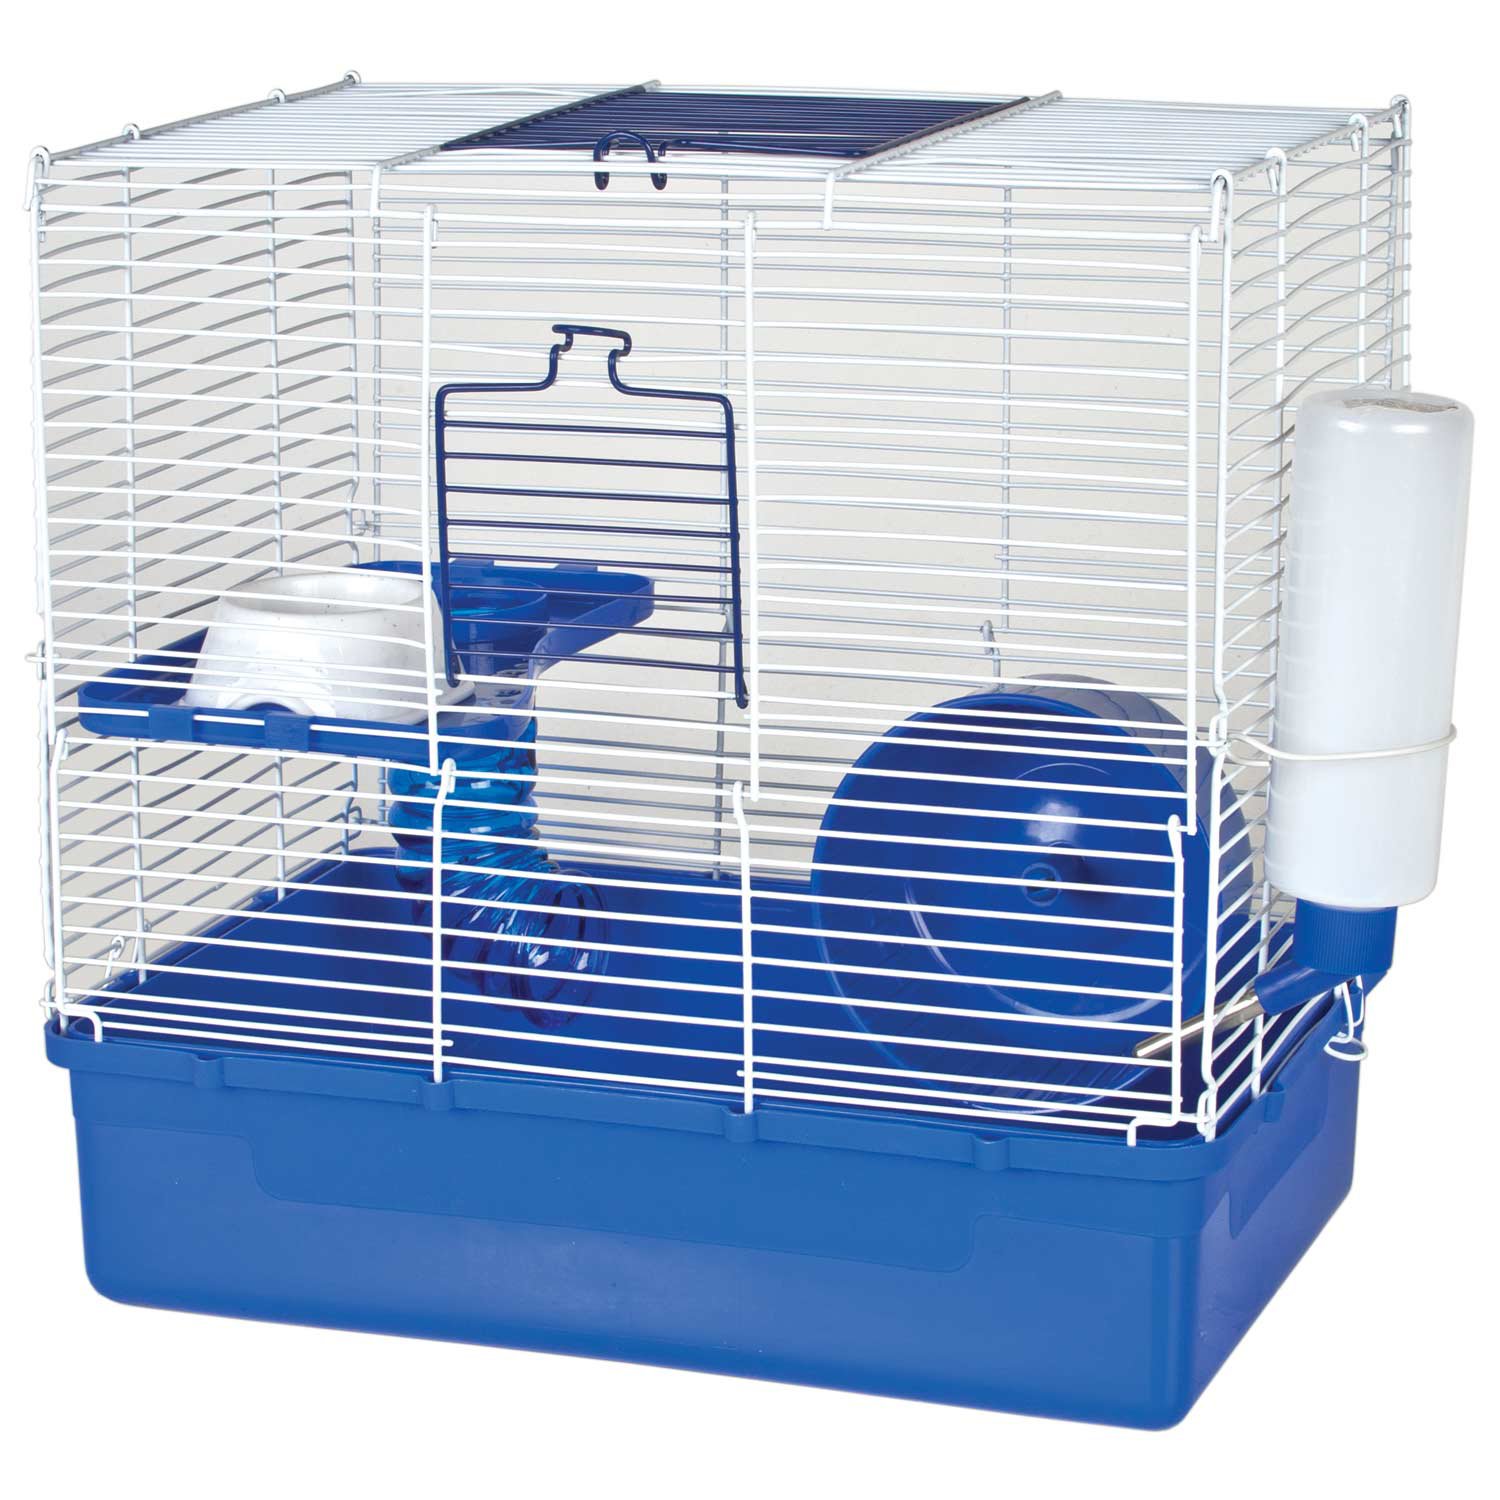 Ware Home Sweet Home Blue 2 Story Hamster Cage Petco,Silver Nickels